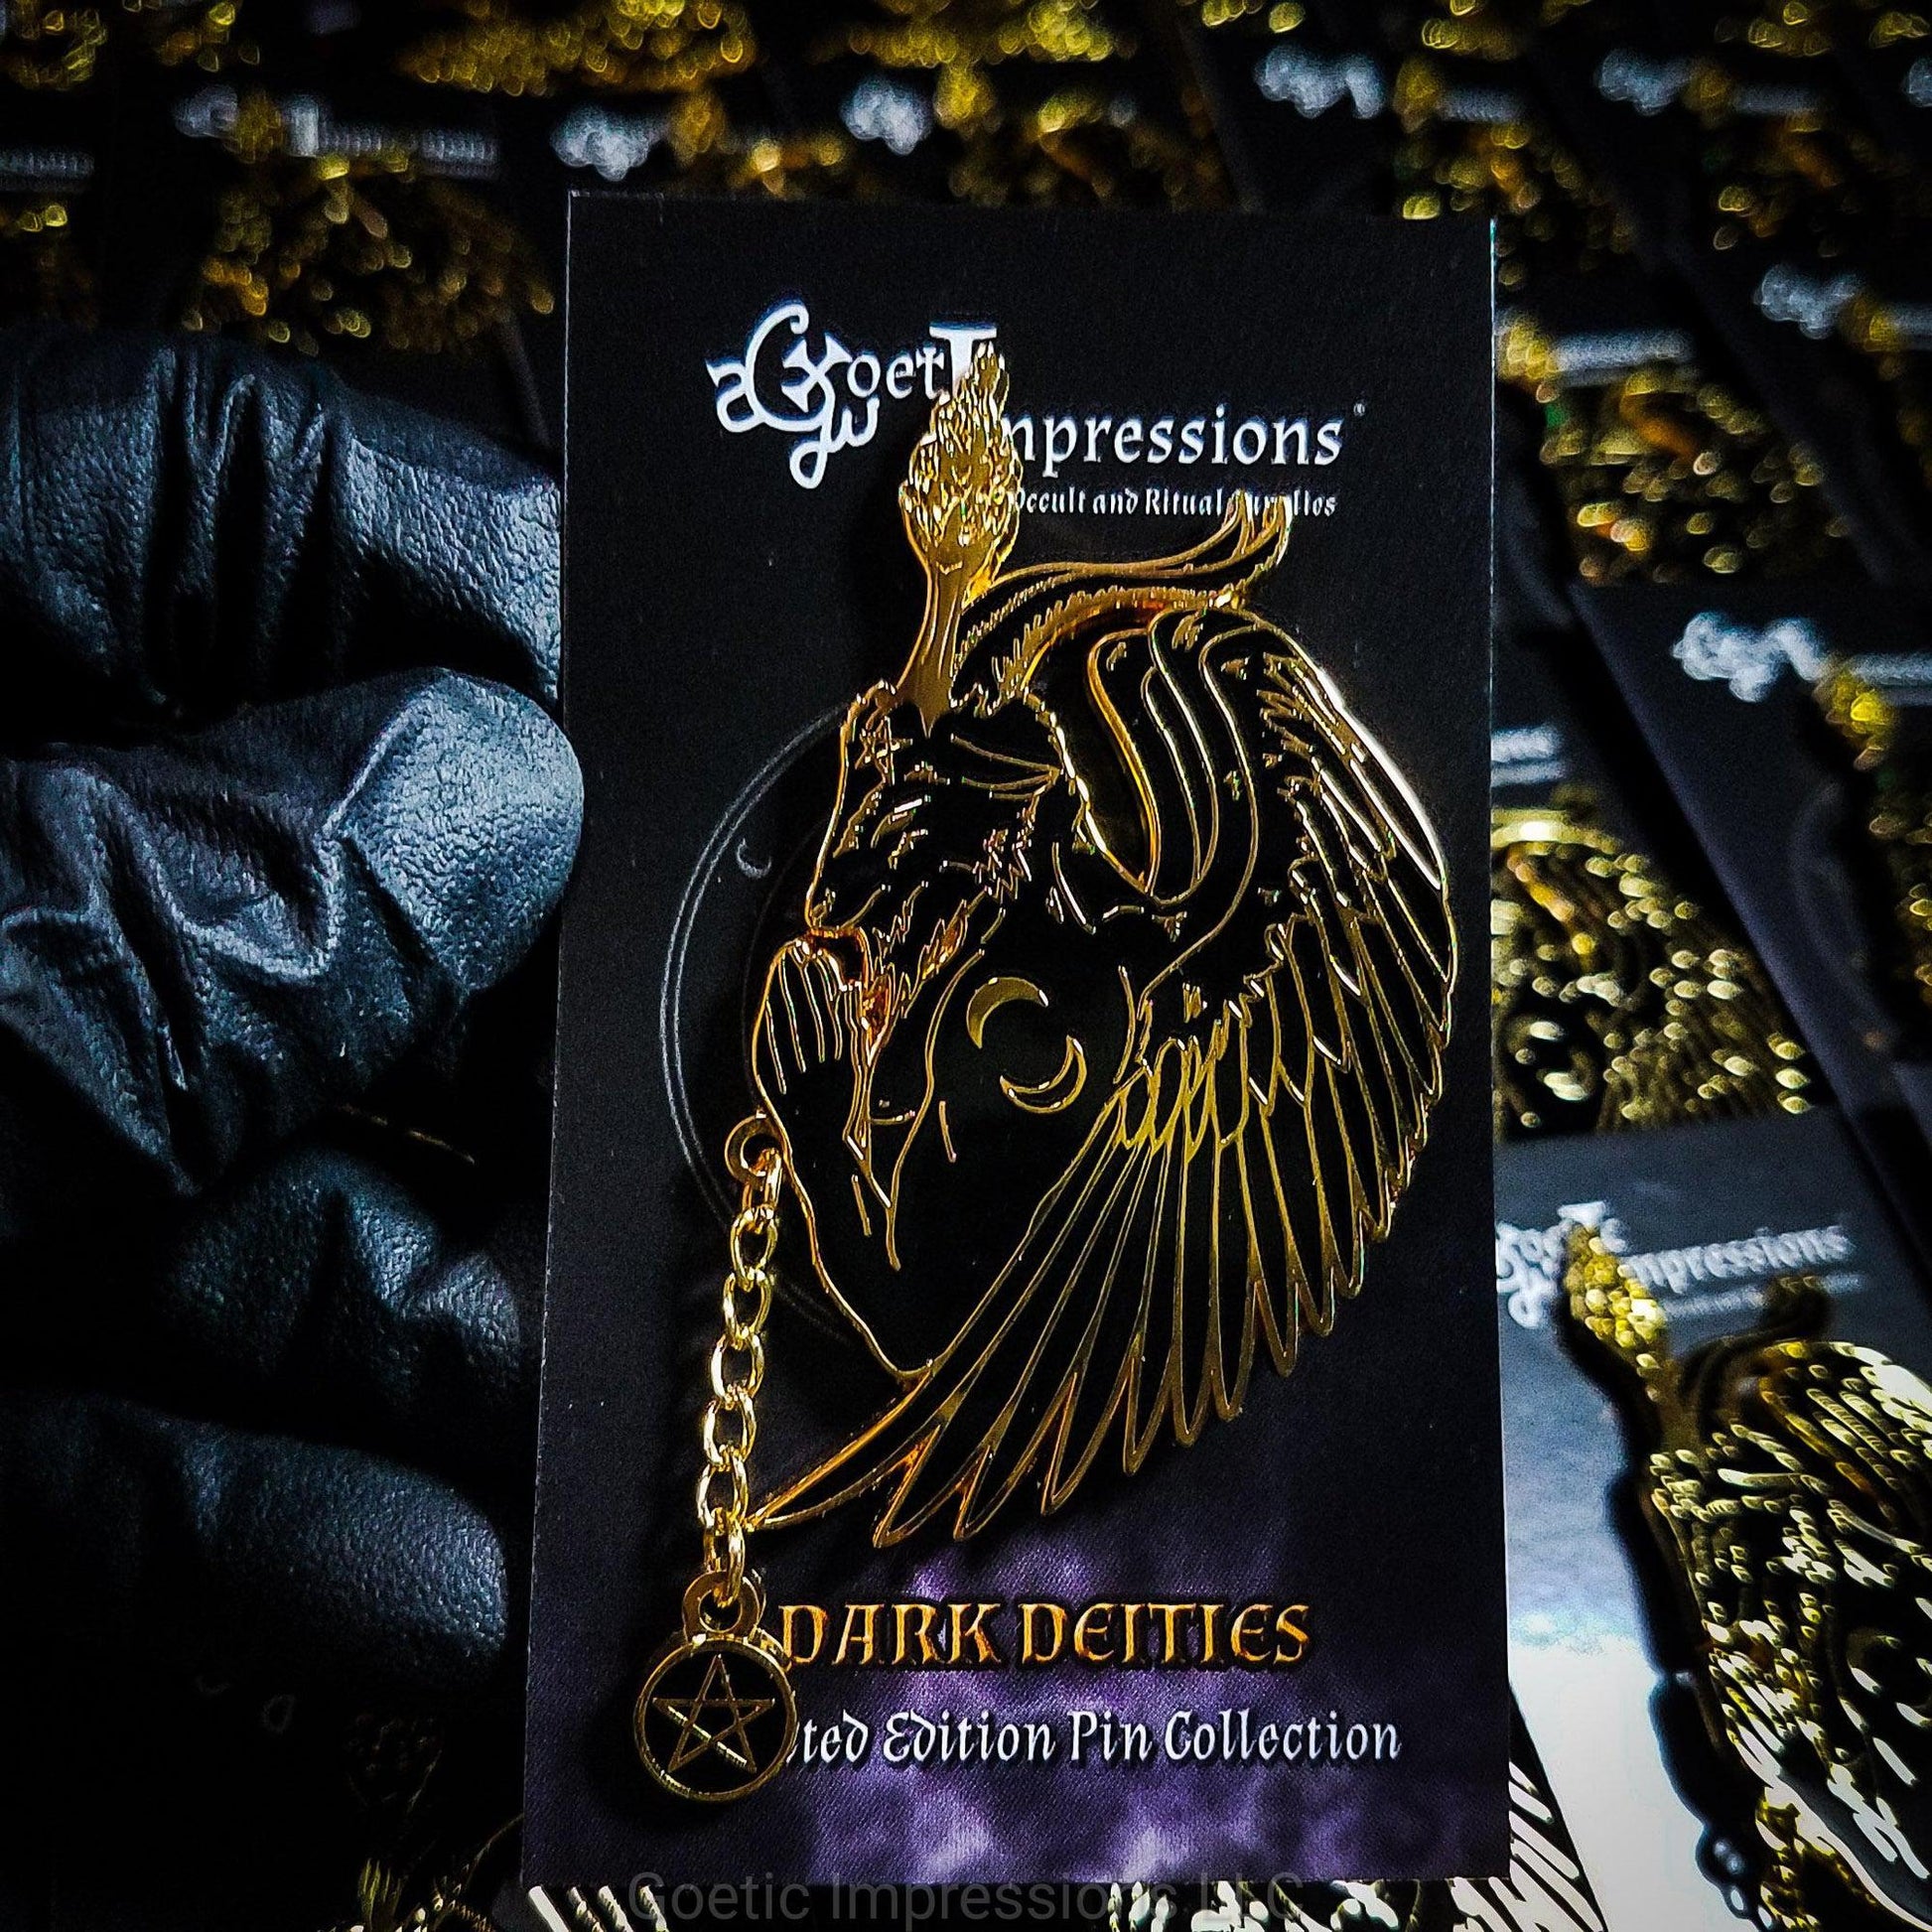 A black and gold hard enamel pin featuring Baphomet in a side profile praying pose. There is a pentacle chain rosary in Baphomet's hands. The pin is shown on a Goetic Impressions backing card held by a glove hand.